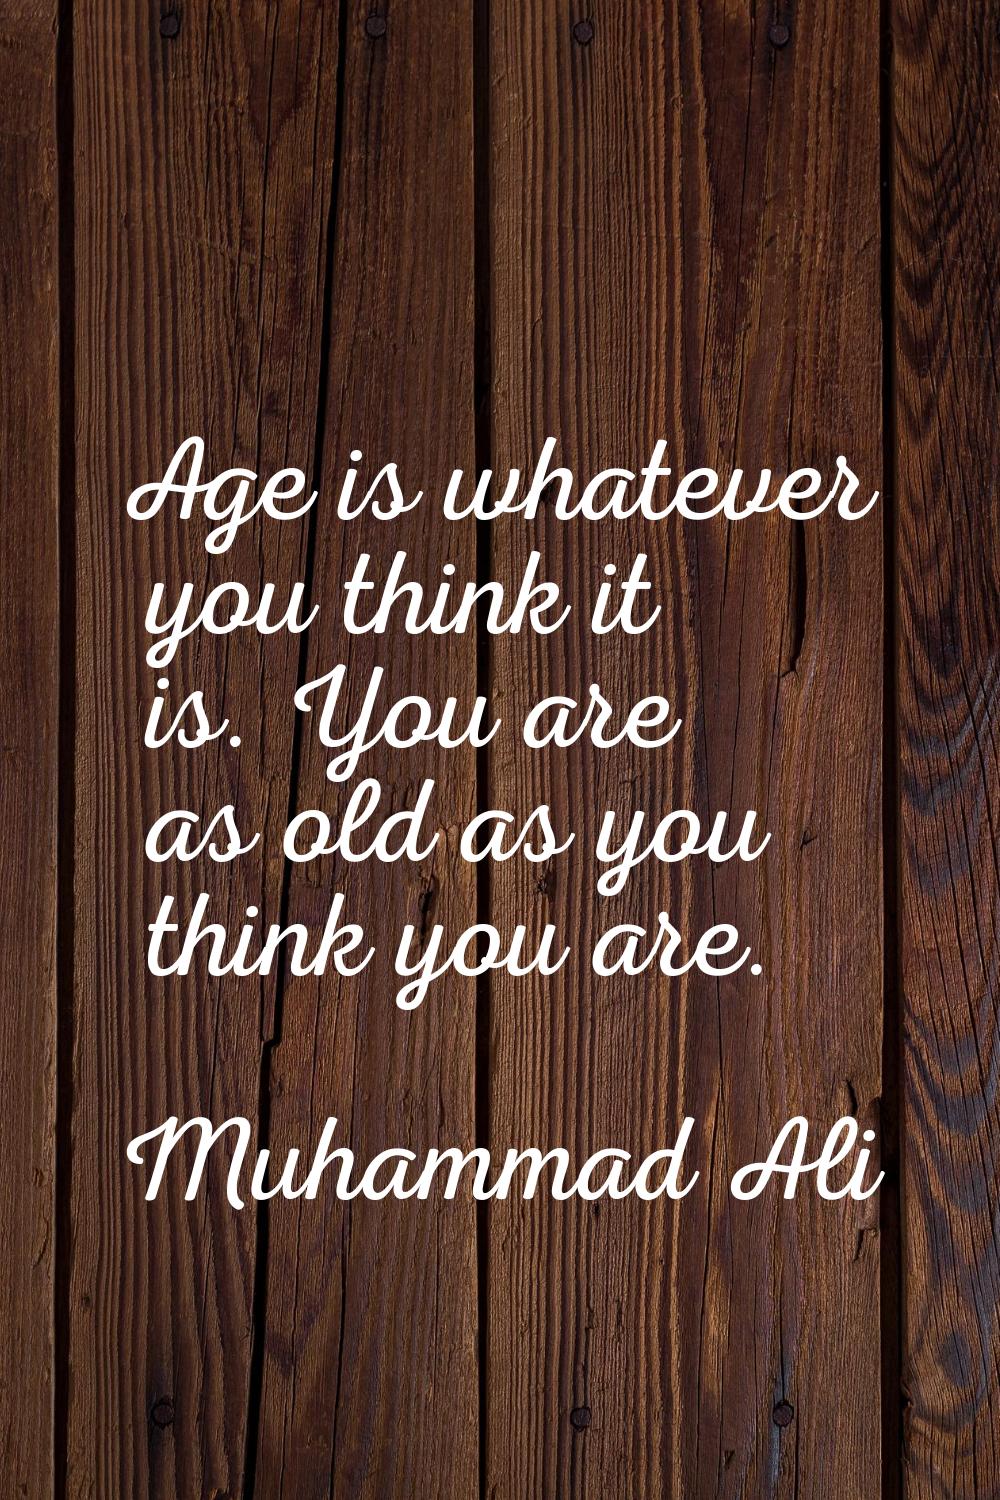 Age is whatever you think it is. You are as old as you think you are.